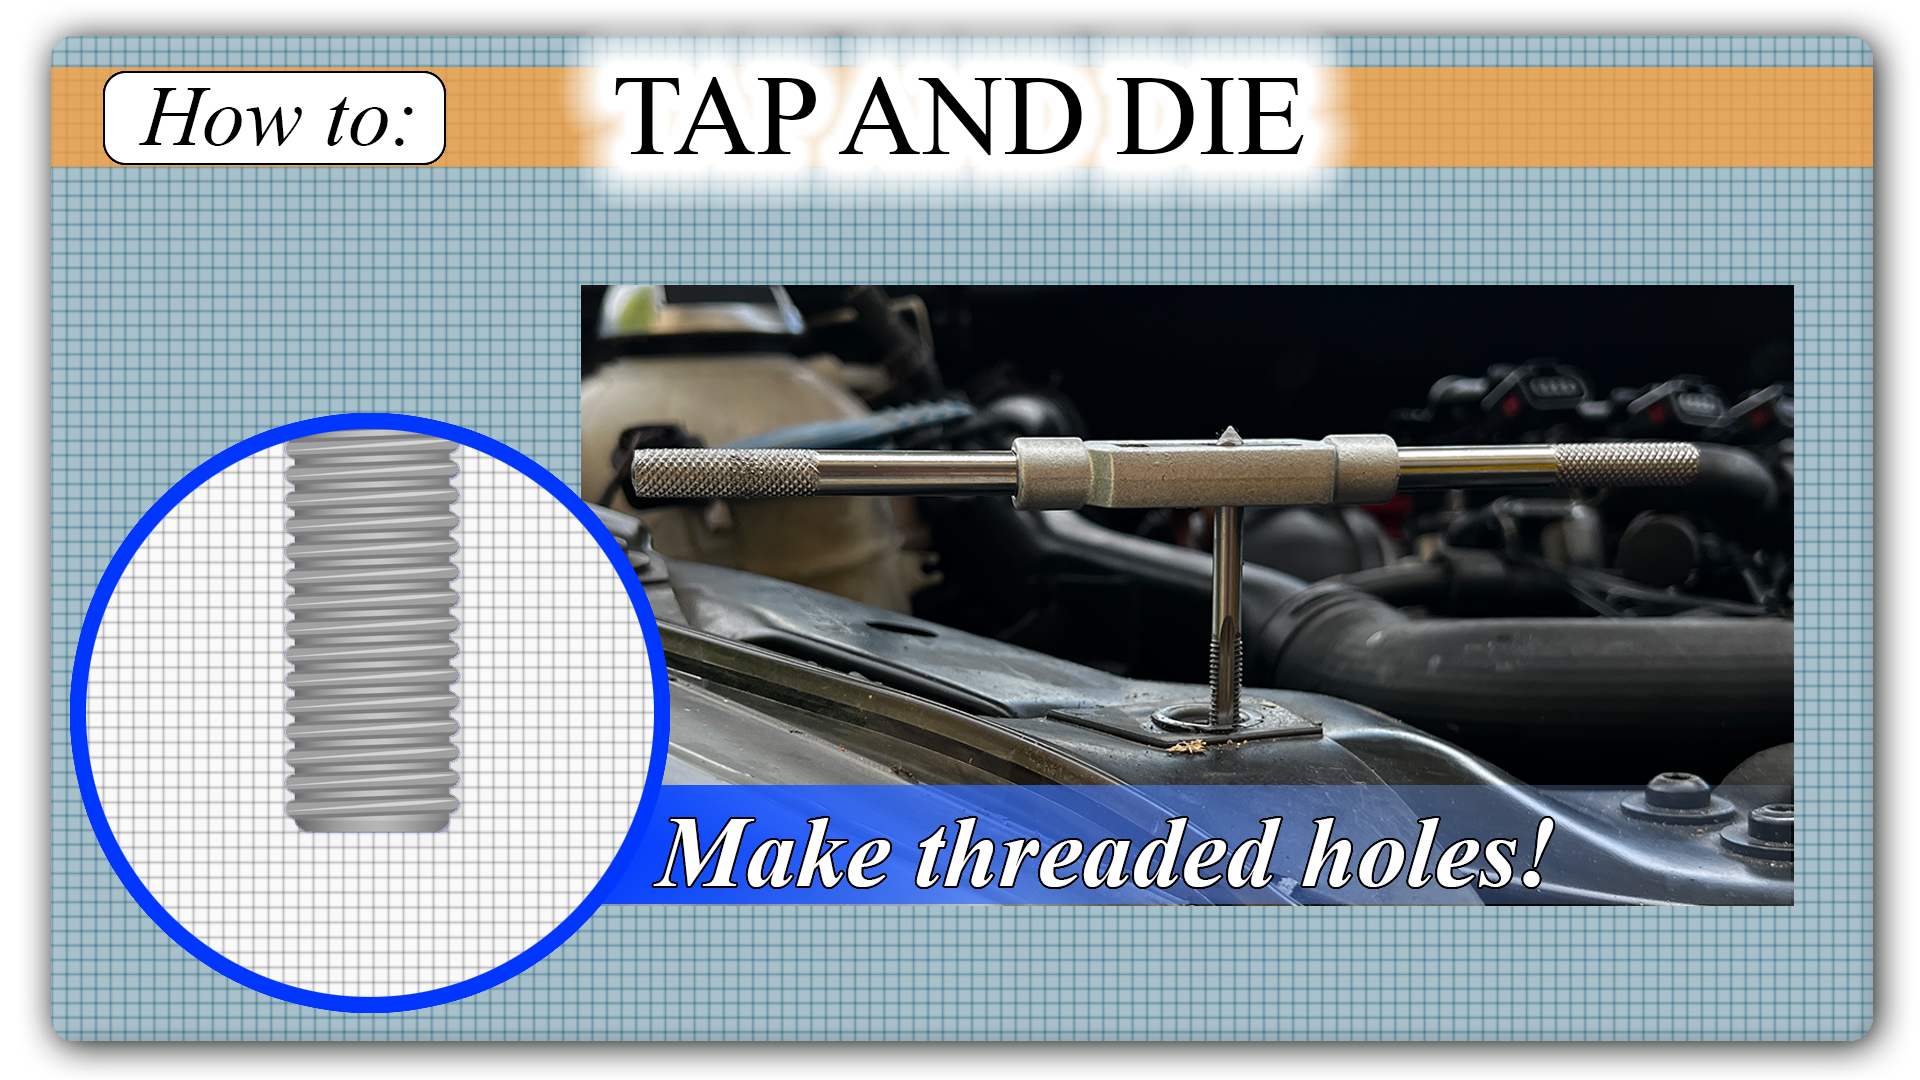 Taps & Dies vs. Thread Chasers: What's the Difference